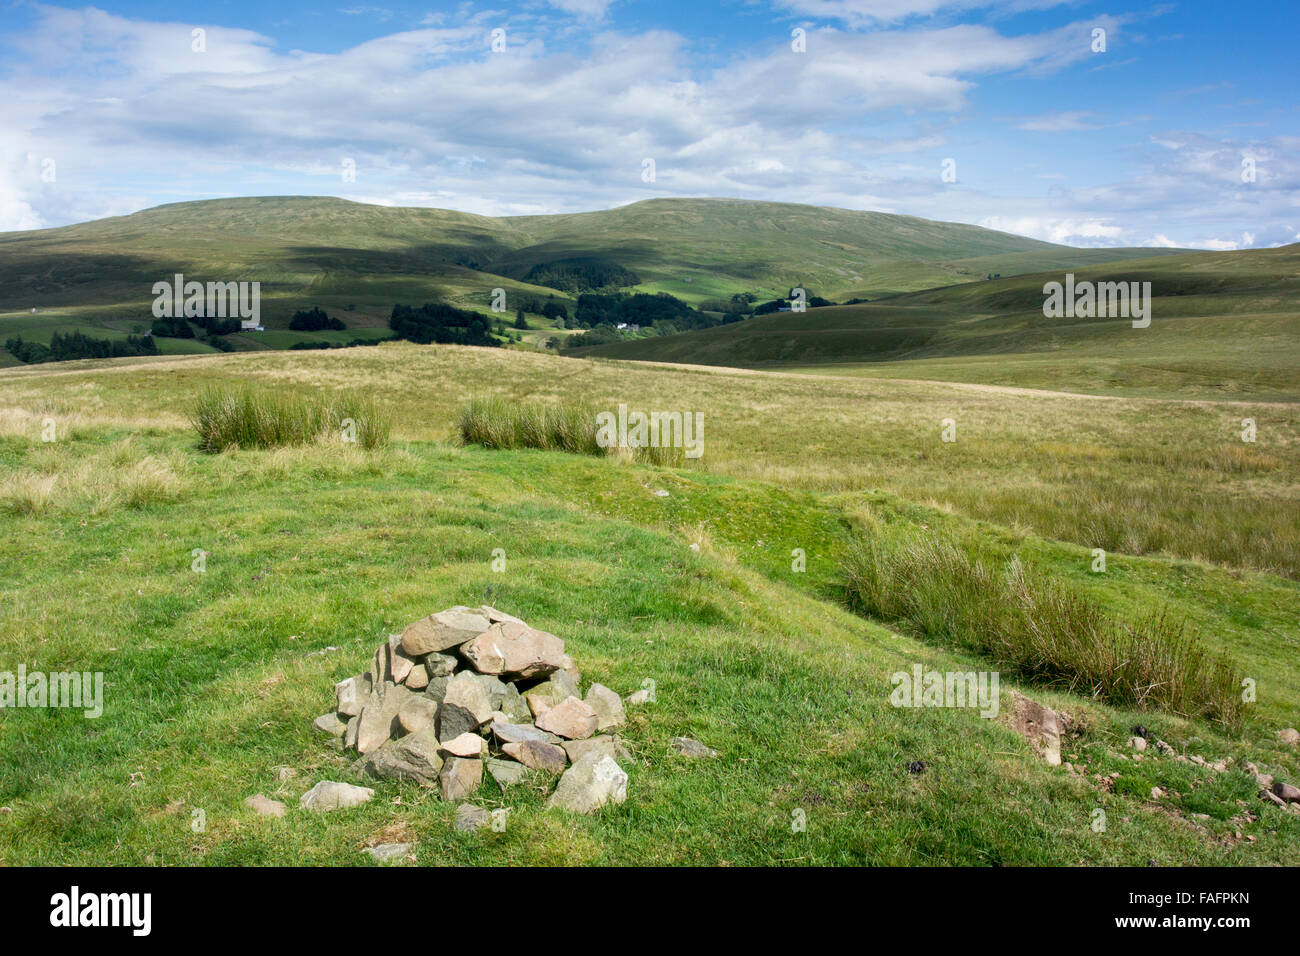 View from Bluecaster peak looking up Rawthey Ghyll towards Wild Boar Fell and Swarth Fell. Cumbria, UK. Stock Photo